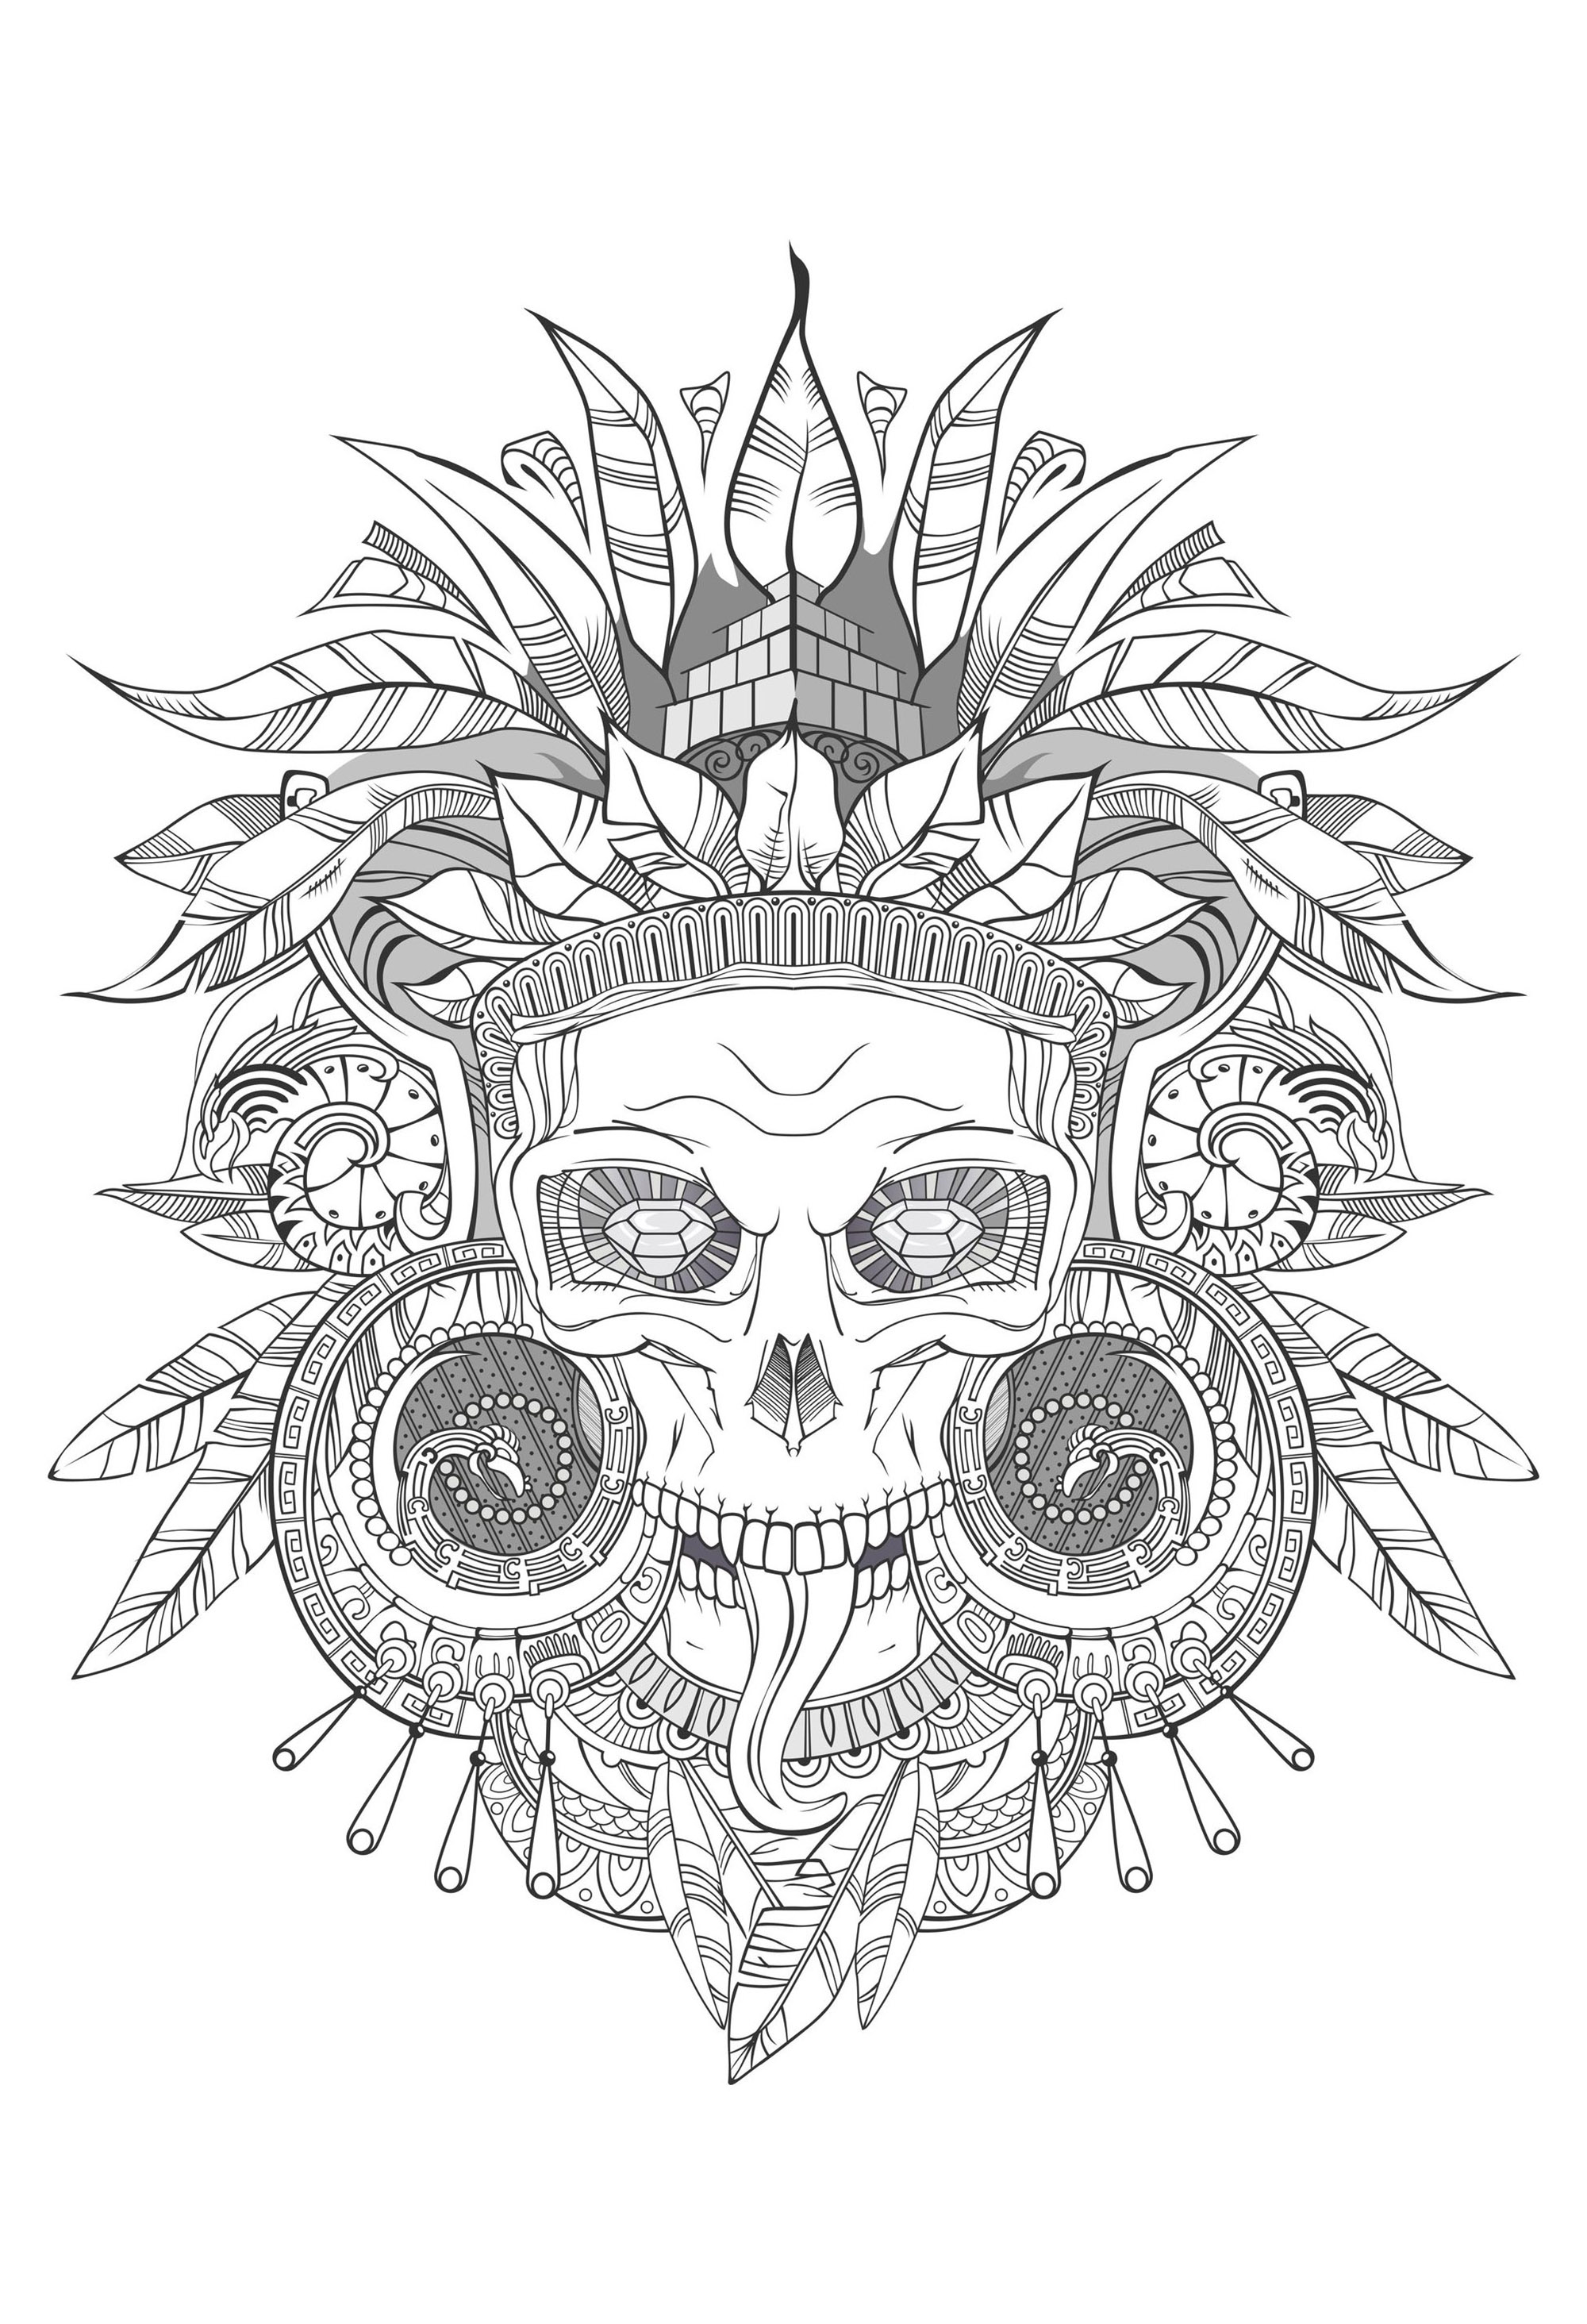 coloring pages of skulls with flames